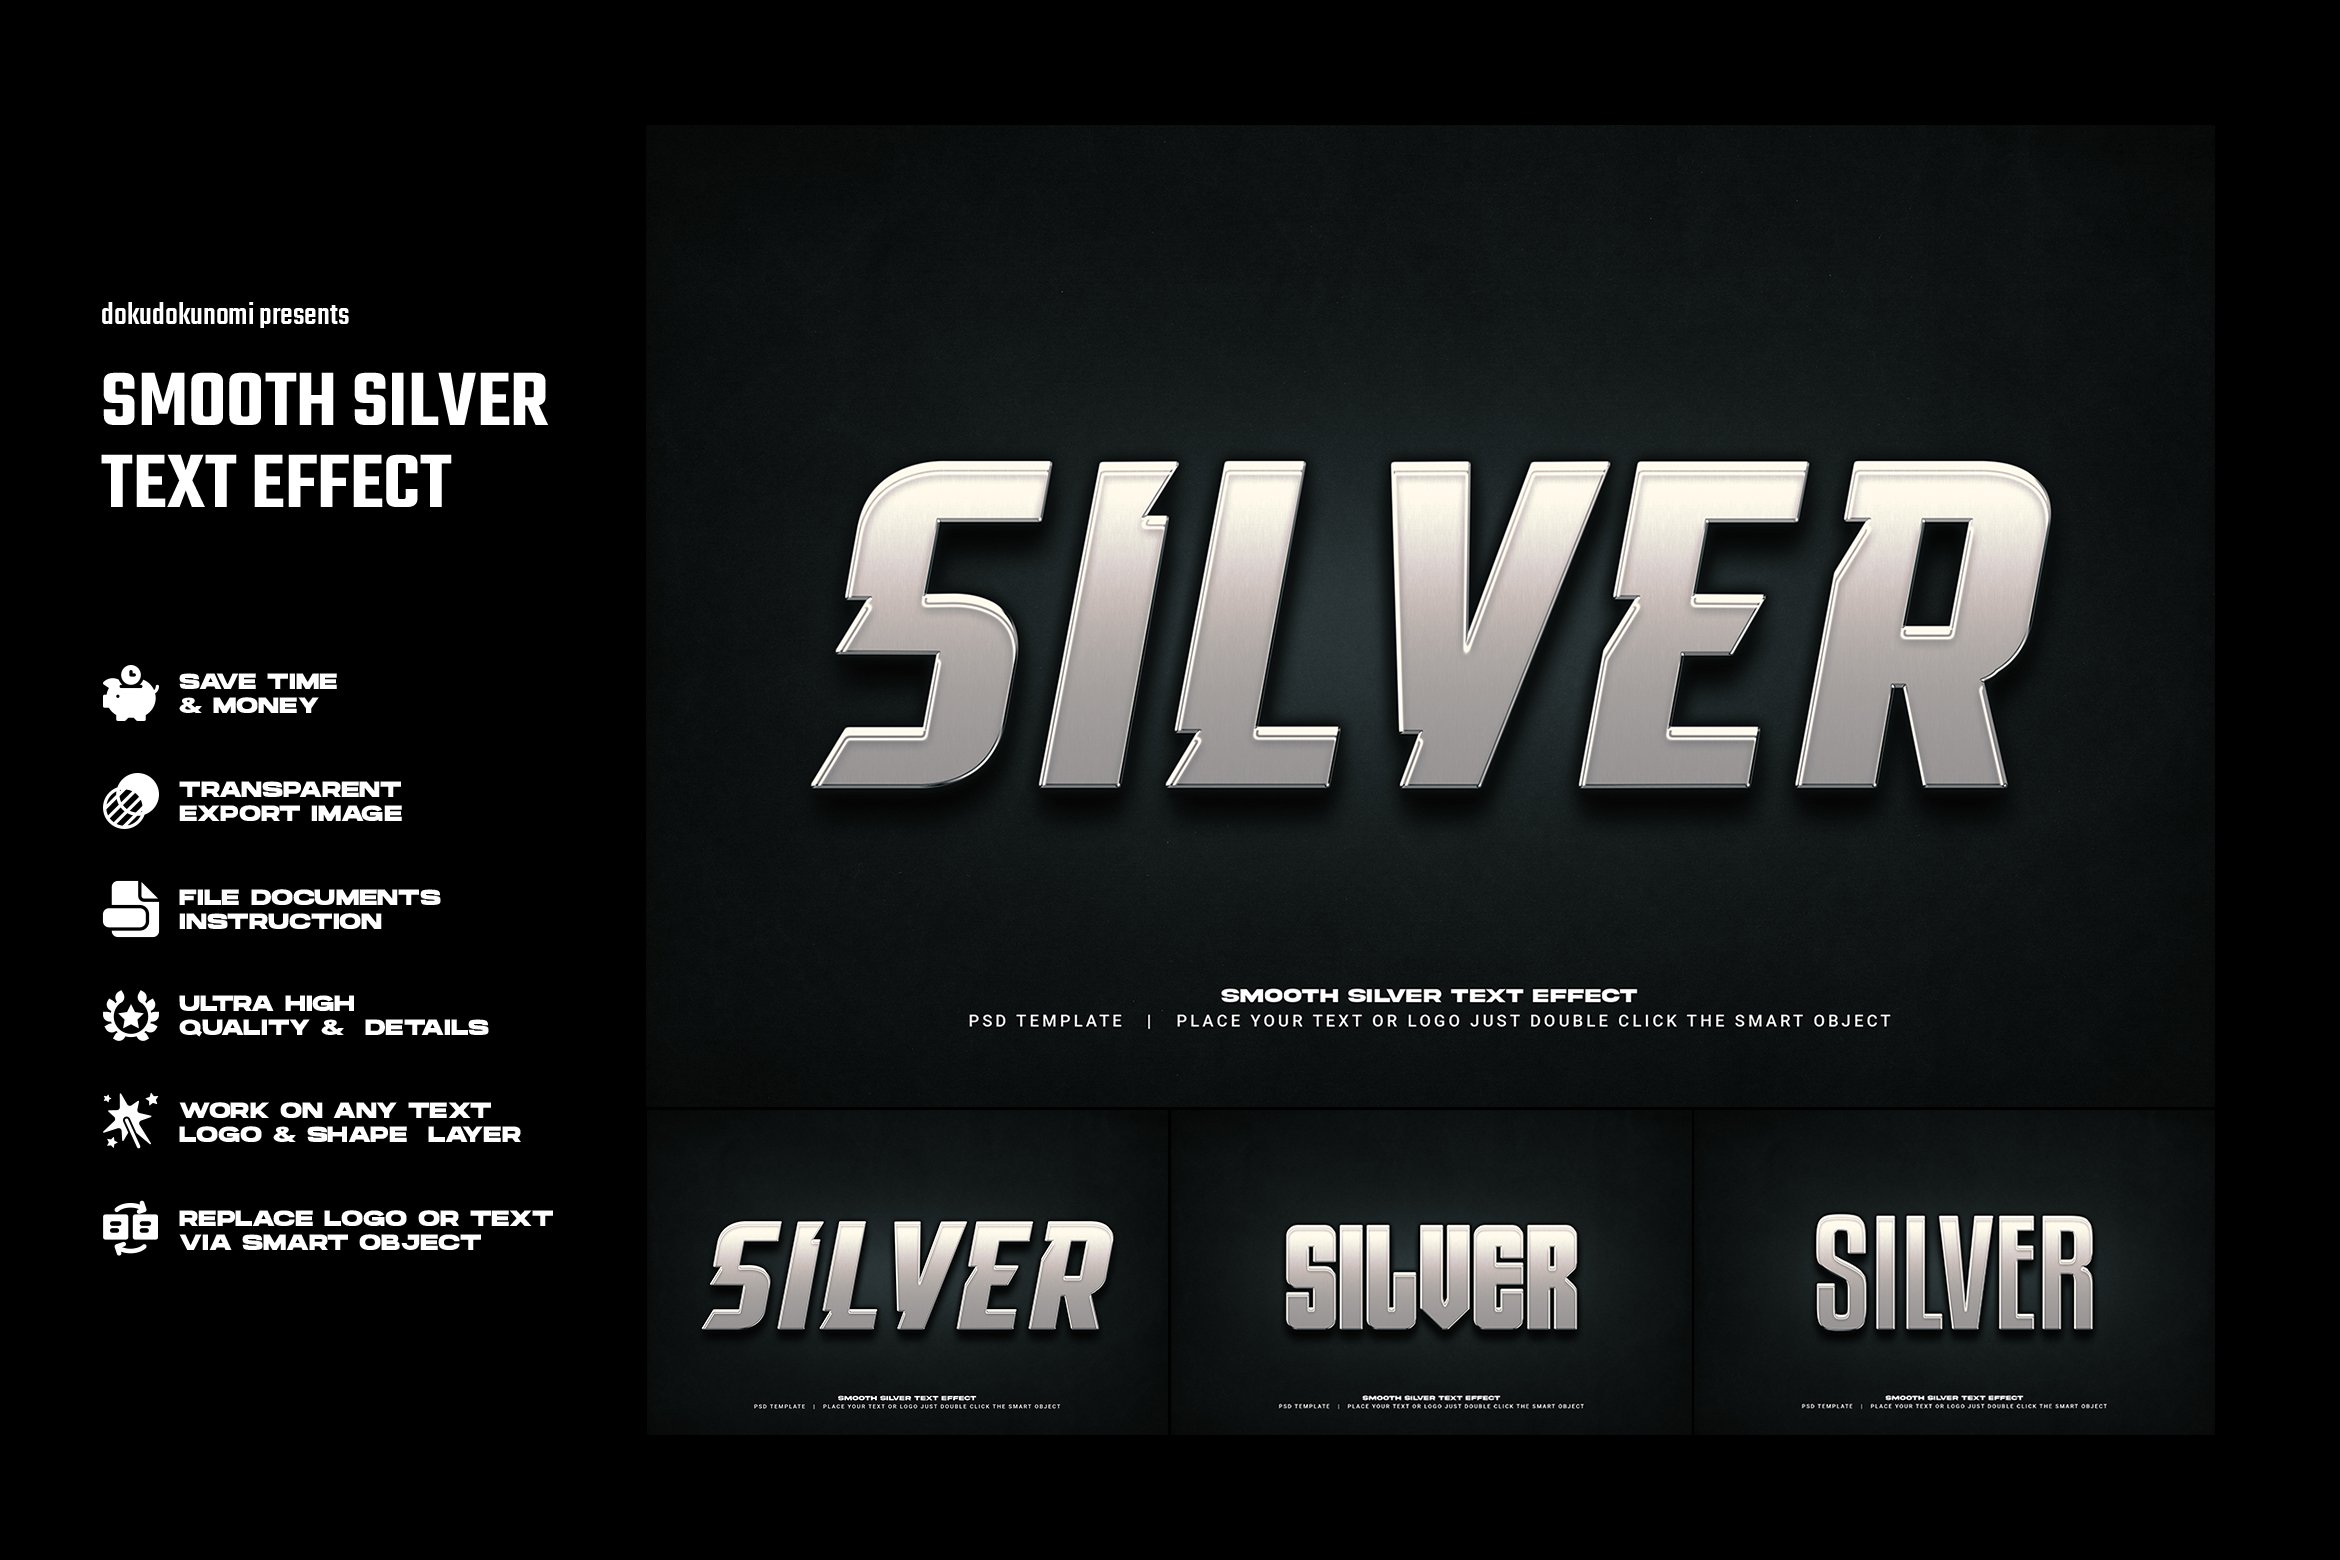 Smooth Silver text effectcover image.